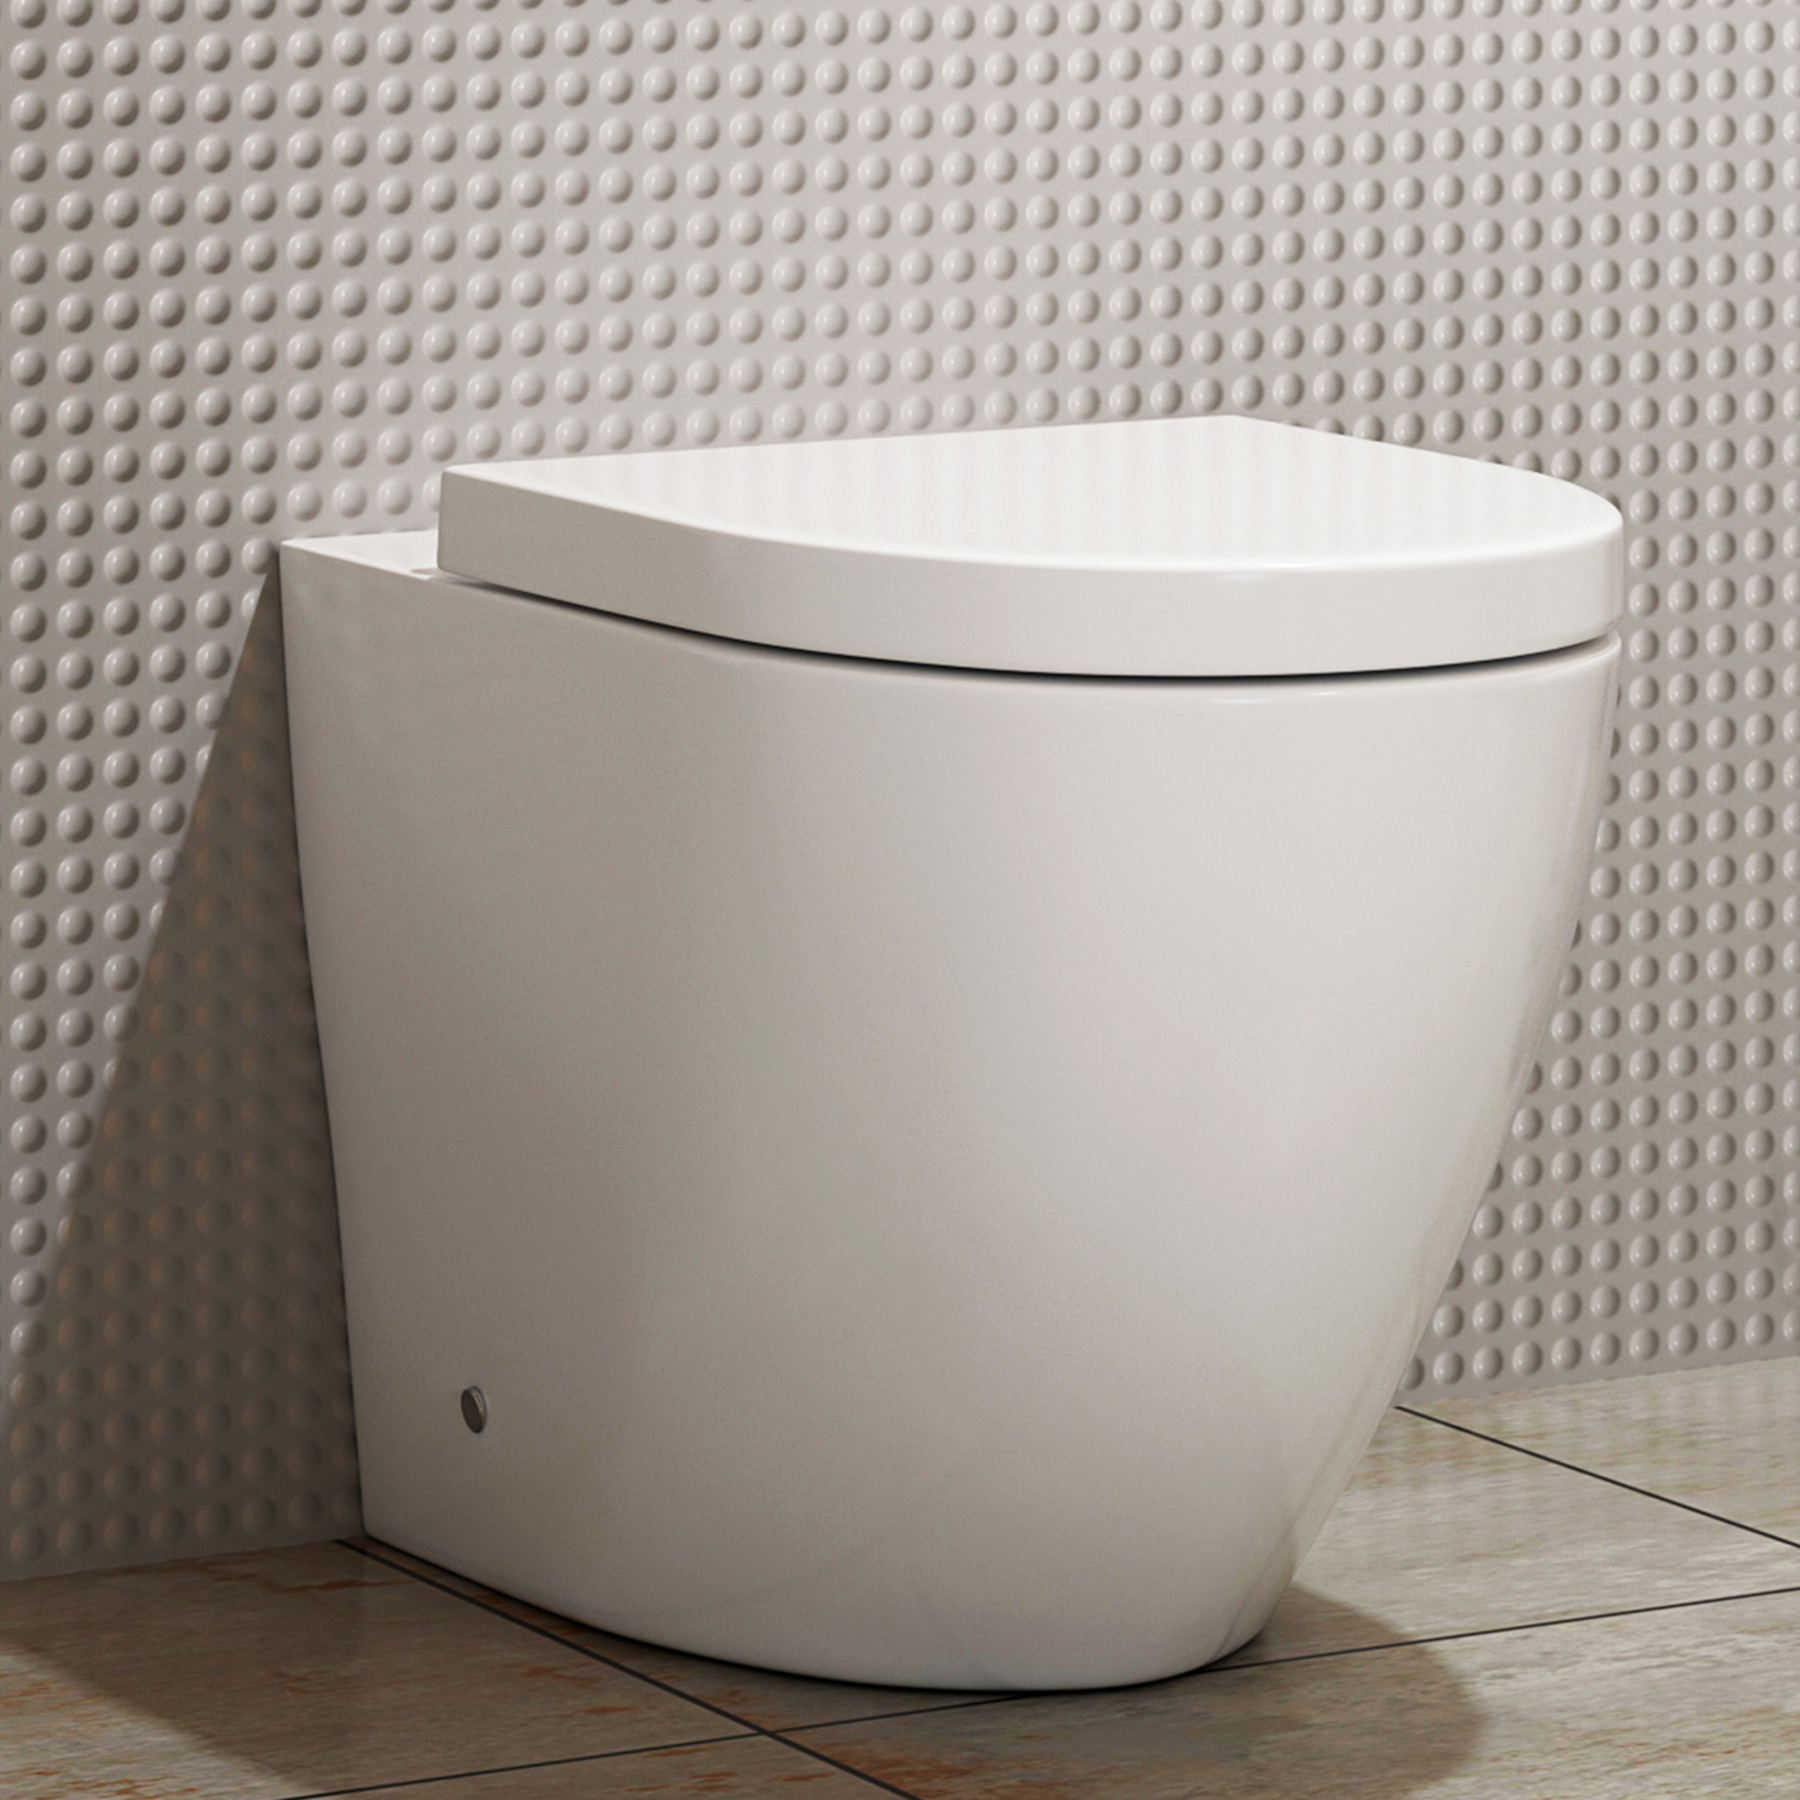 Abacus Gloss White Back to Wall Toilet with Soft Close Seat - Round